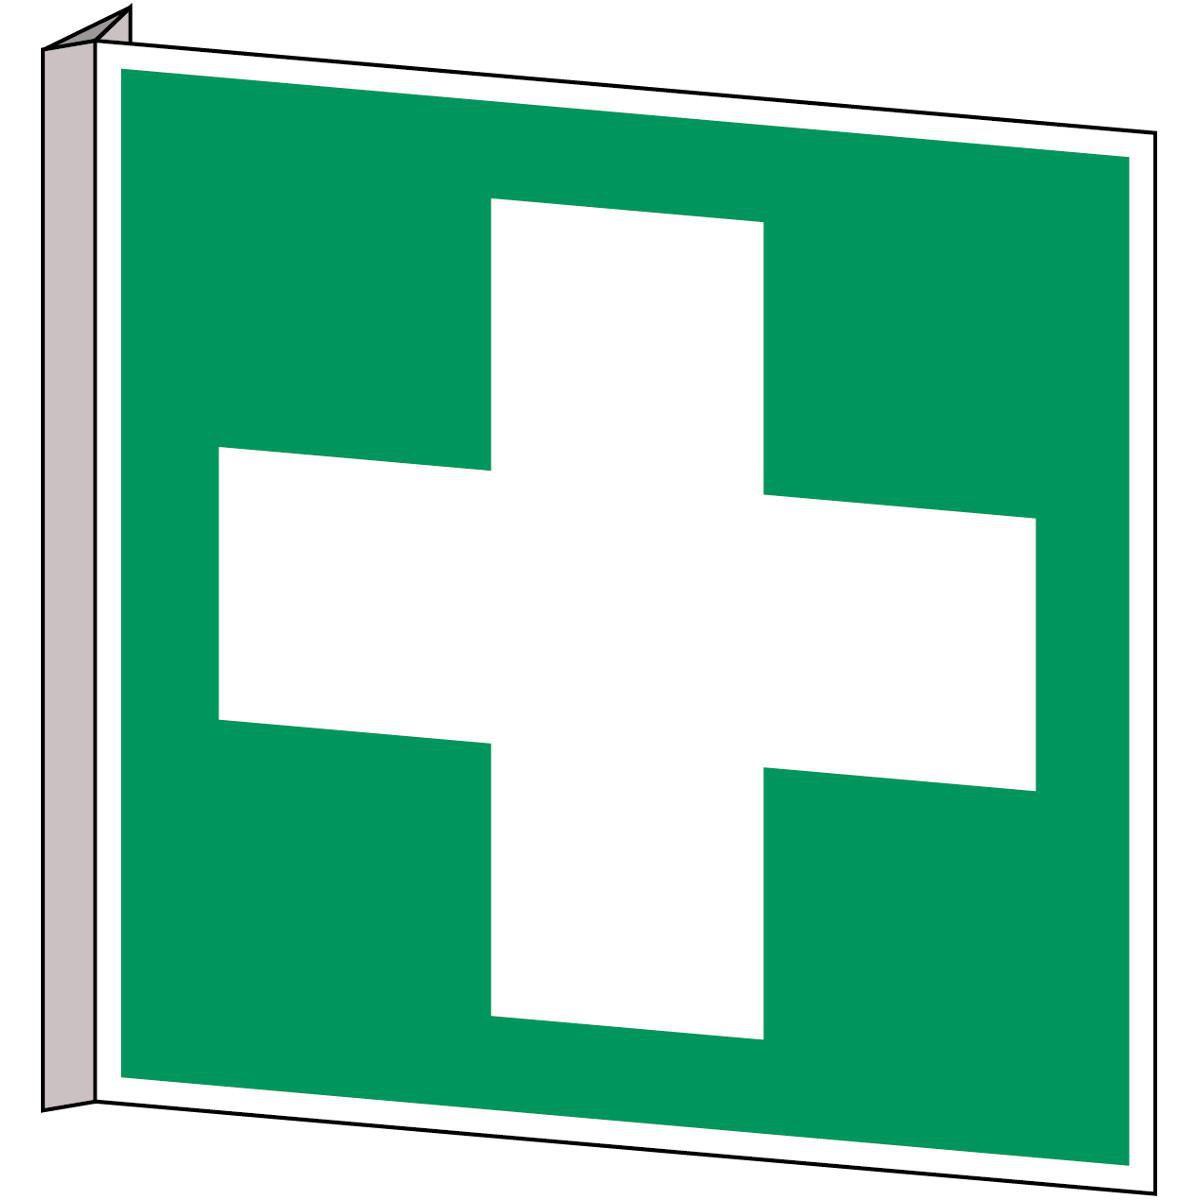 Brady PIC E003-318X318-BIPVC-CRD1 W128410364 ISO Safety Sign - First aid 